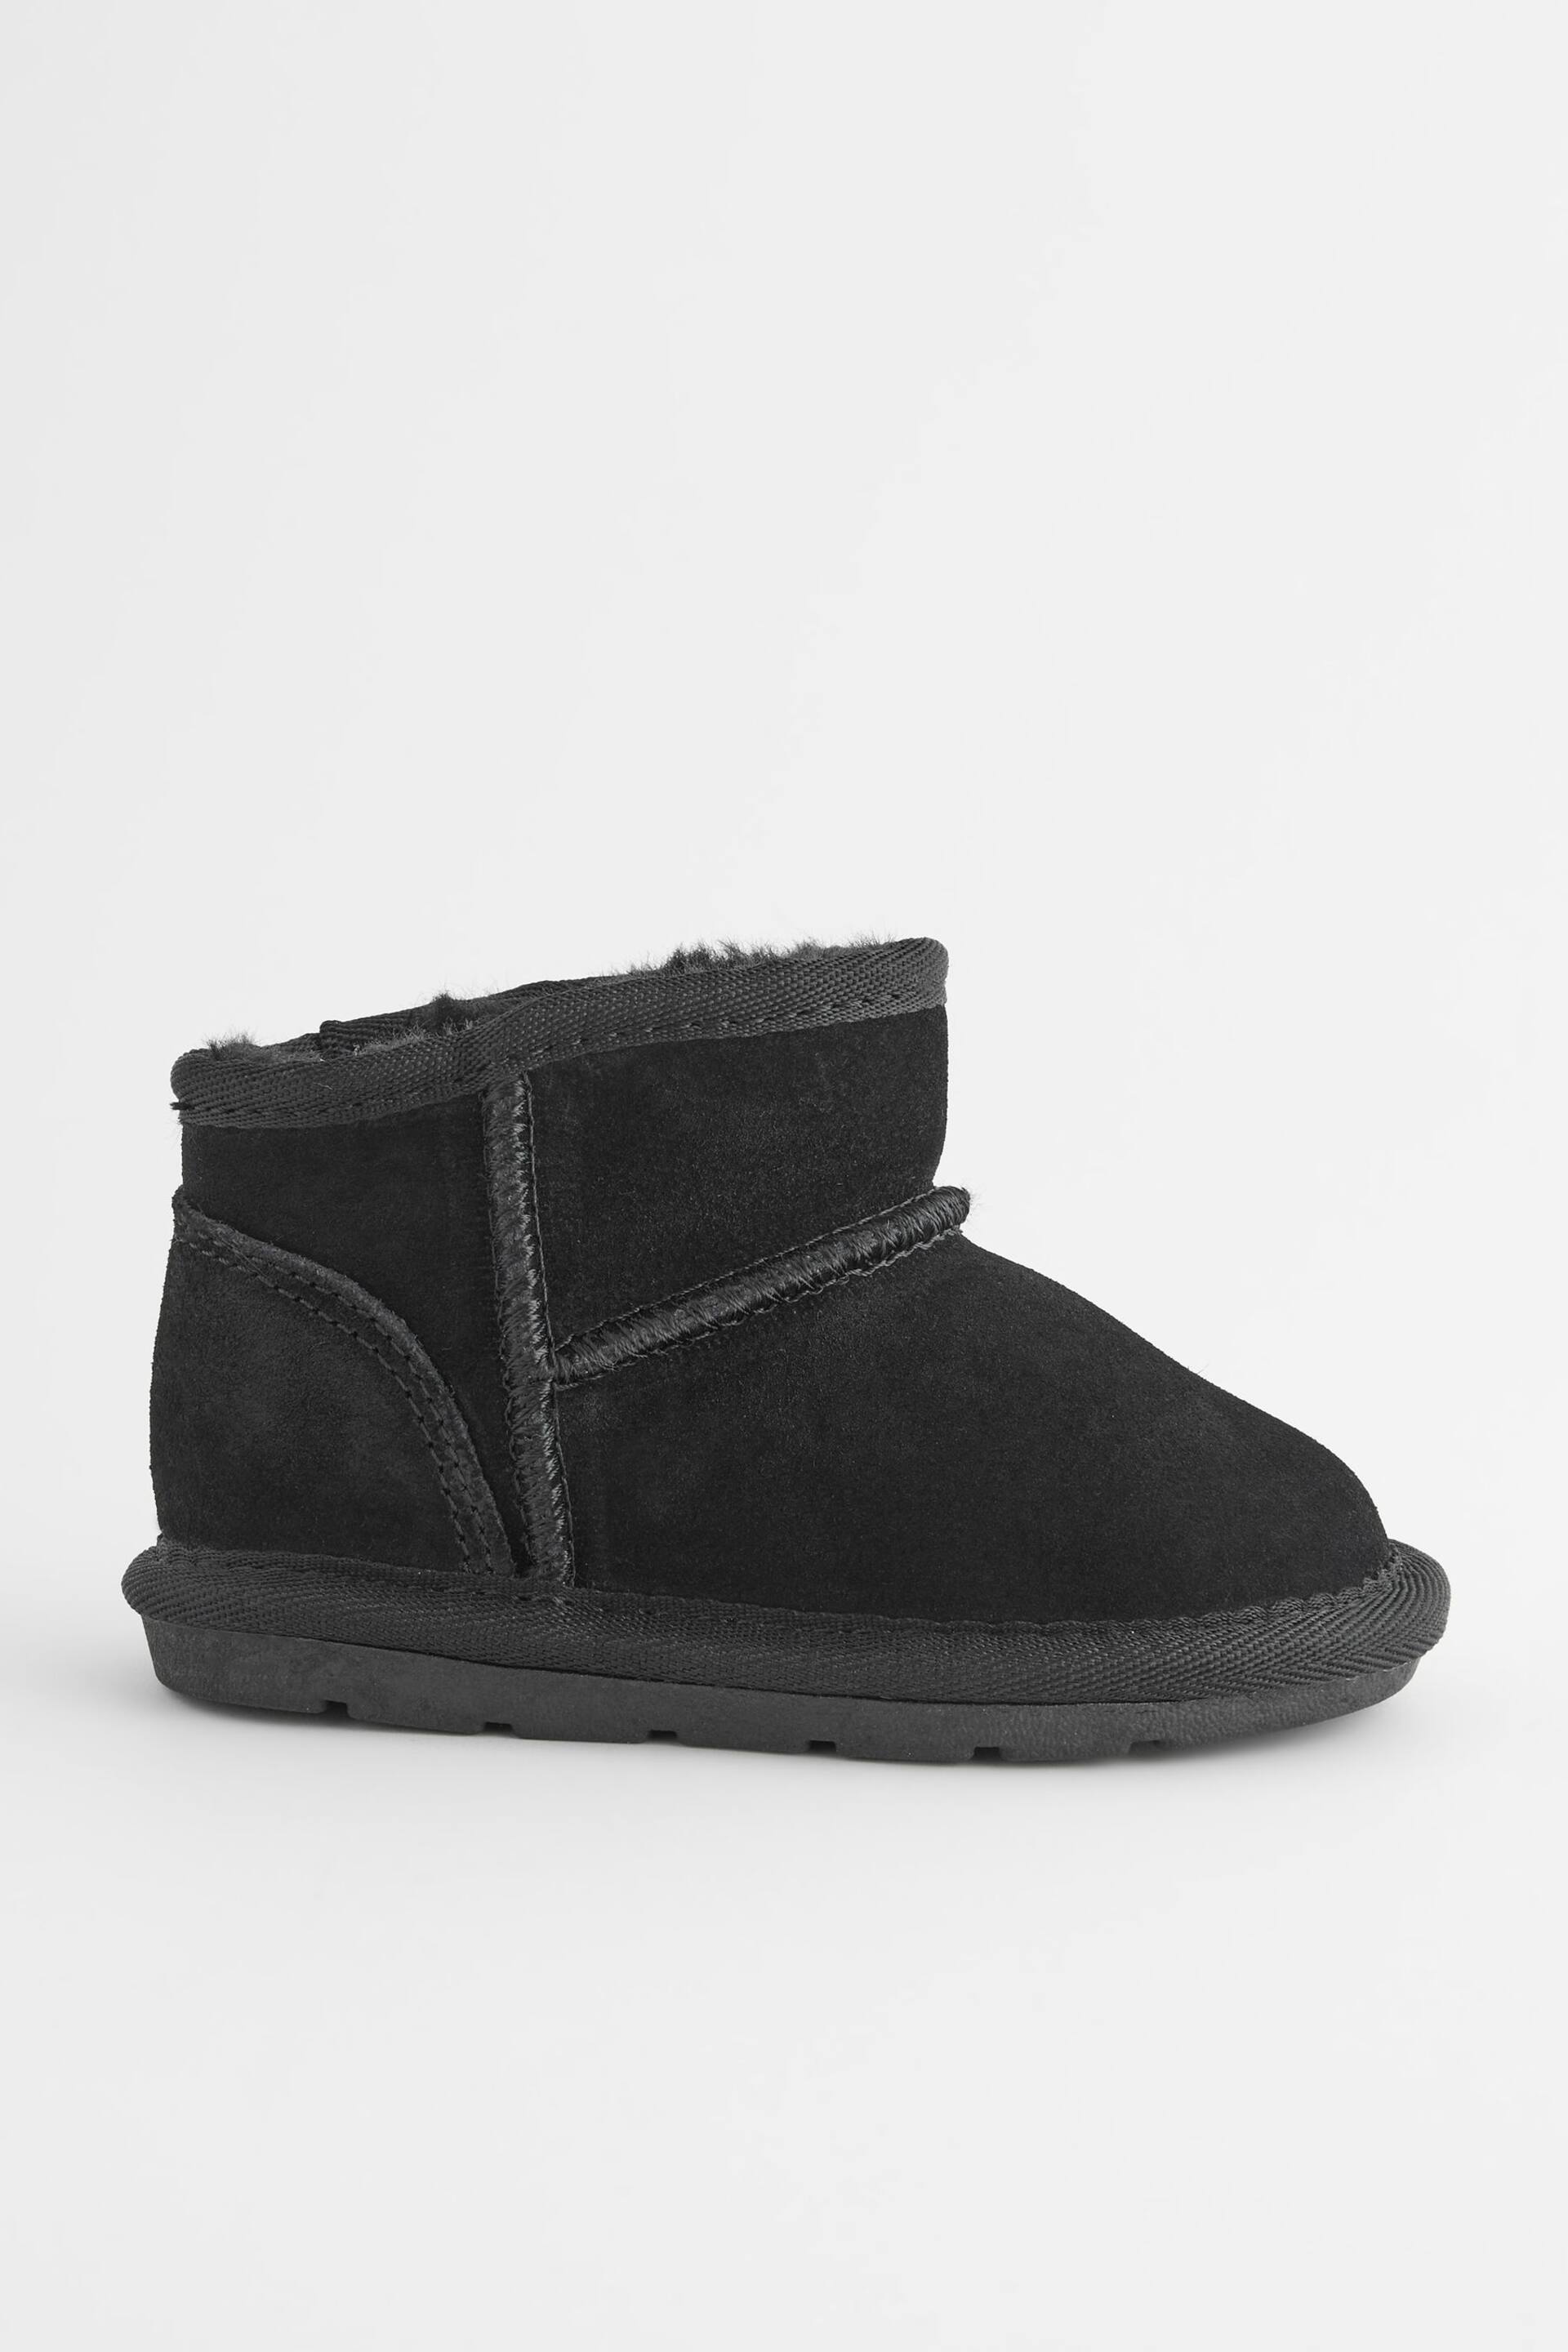 Black Suede Mini Faux Fur Lined Water Repellent Pull-On Suede Boots - Image 5 of 9